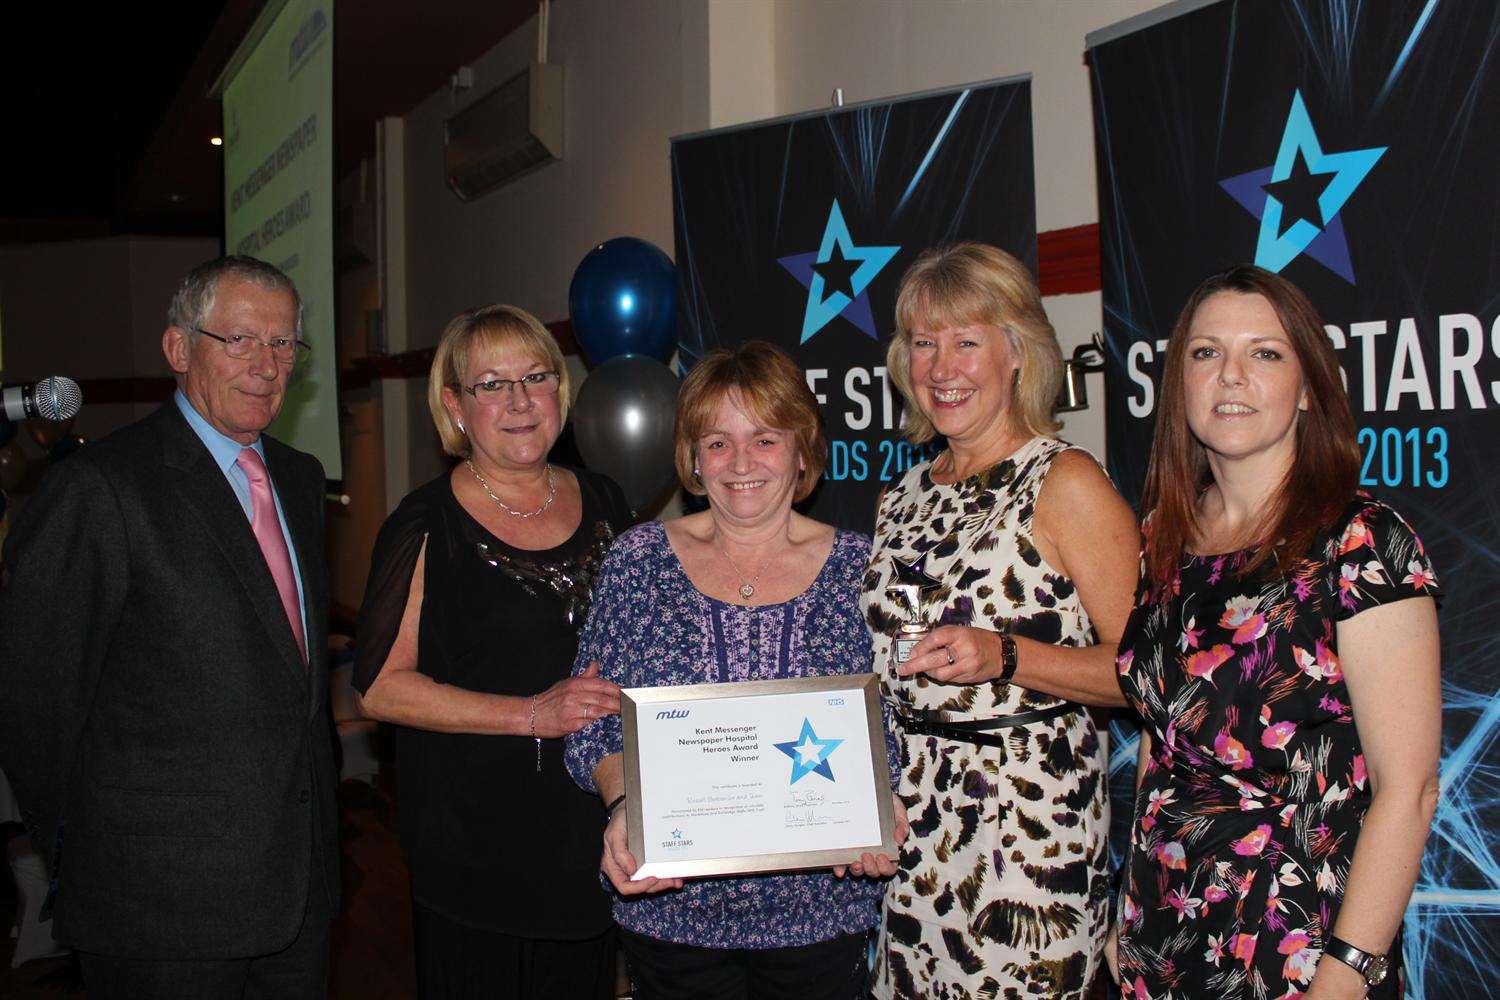 The team who work with consultant Russell Burcombe at the Kent Oncology Centre at Maidstone Hospital receive their KM award last year from editor Denise Eaton (right) and Nick Hewer from the Apprentice